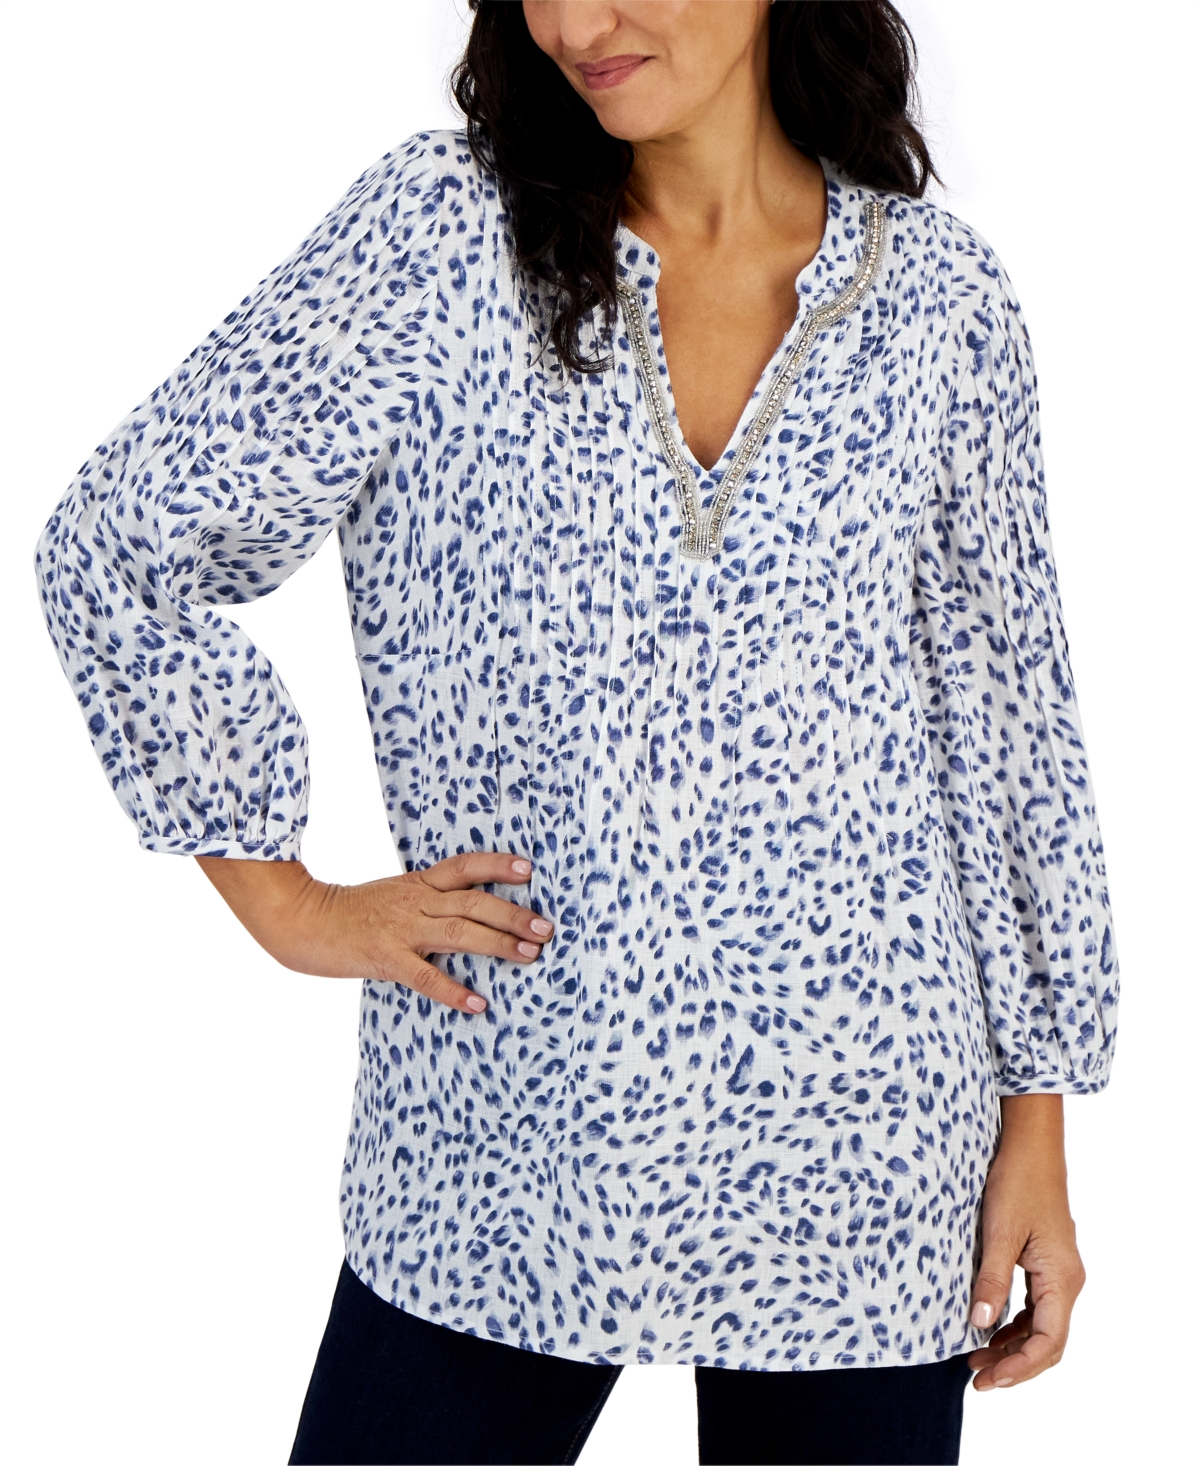 Petite 100% Linen Split-Neck Puffed 3/4-Sleeve Top, Created for Macy's - Bright White Combo